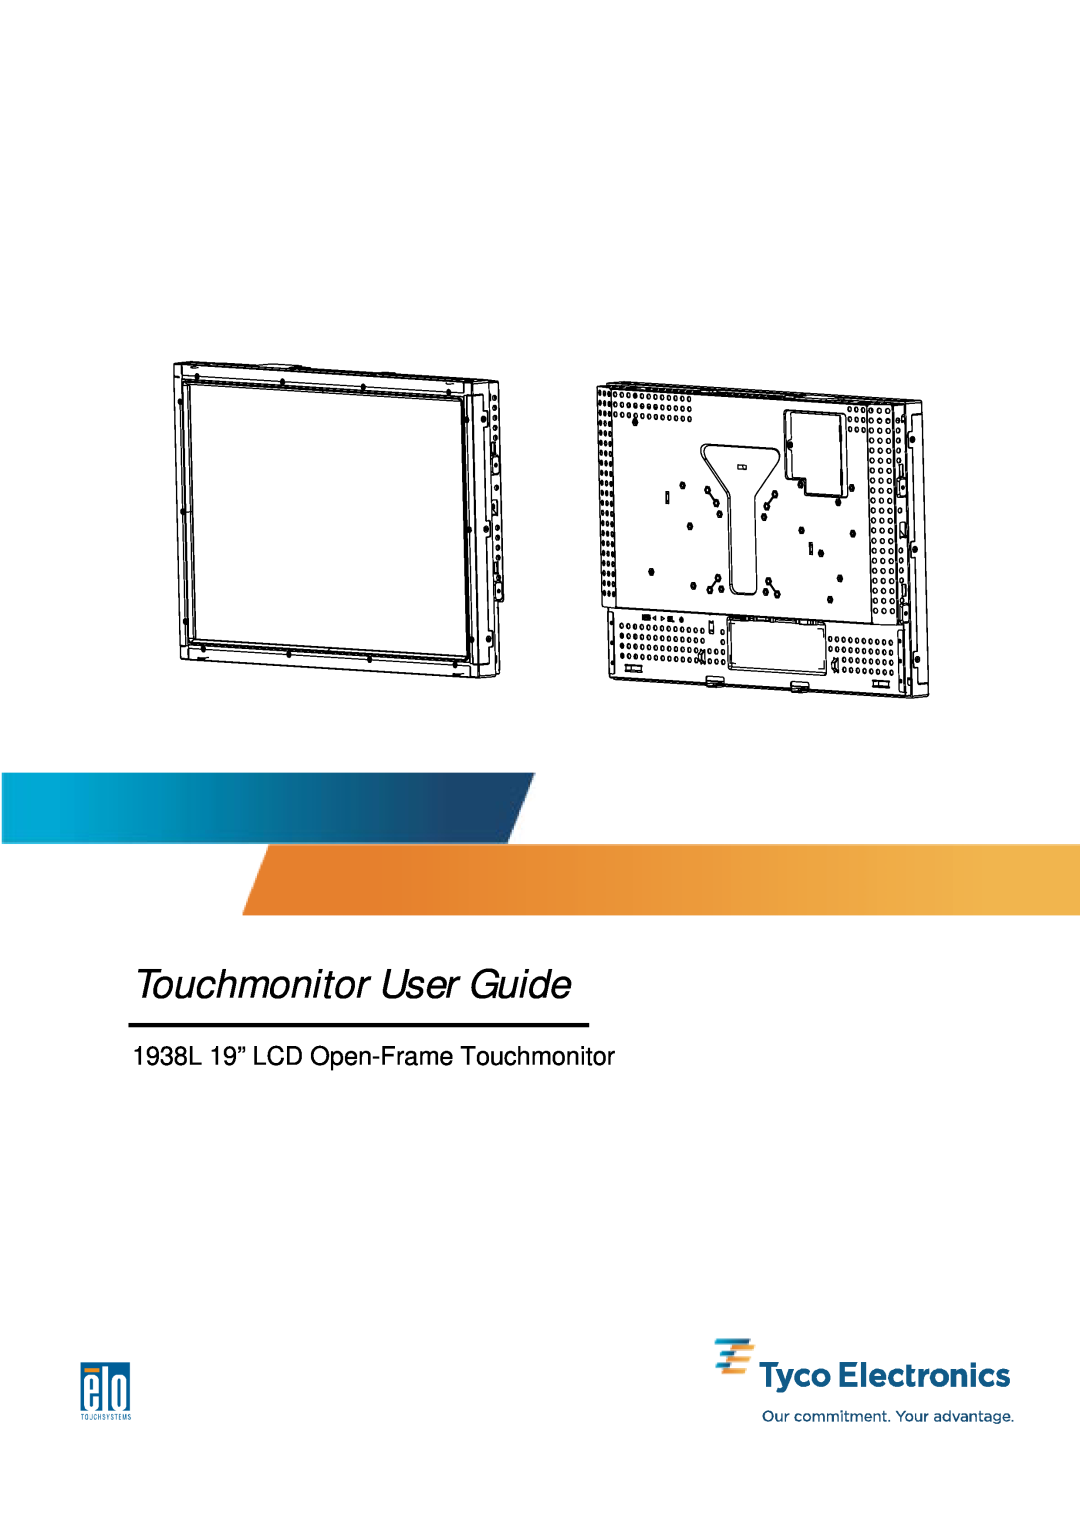 Tyco Electronics manual Touchmonitor User Guide, 1938L 19” LCD Open-Frame Touchmonitor 